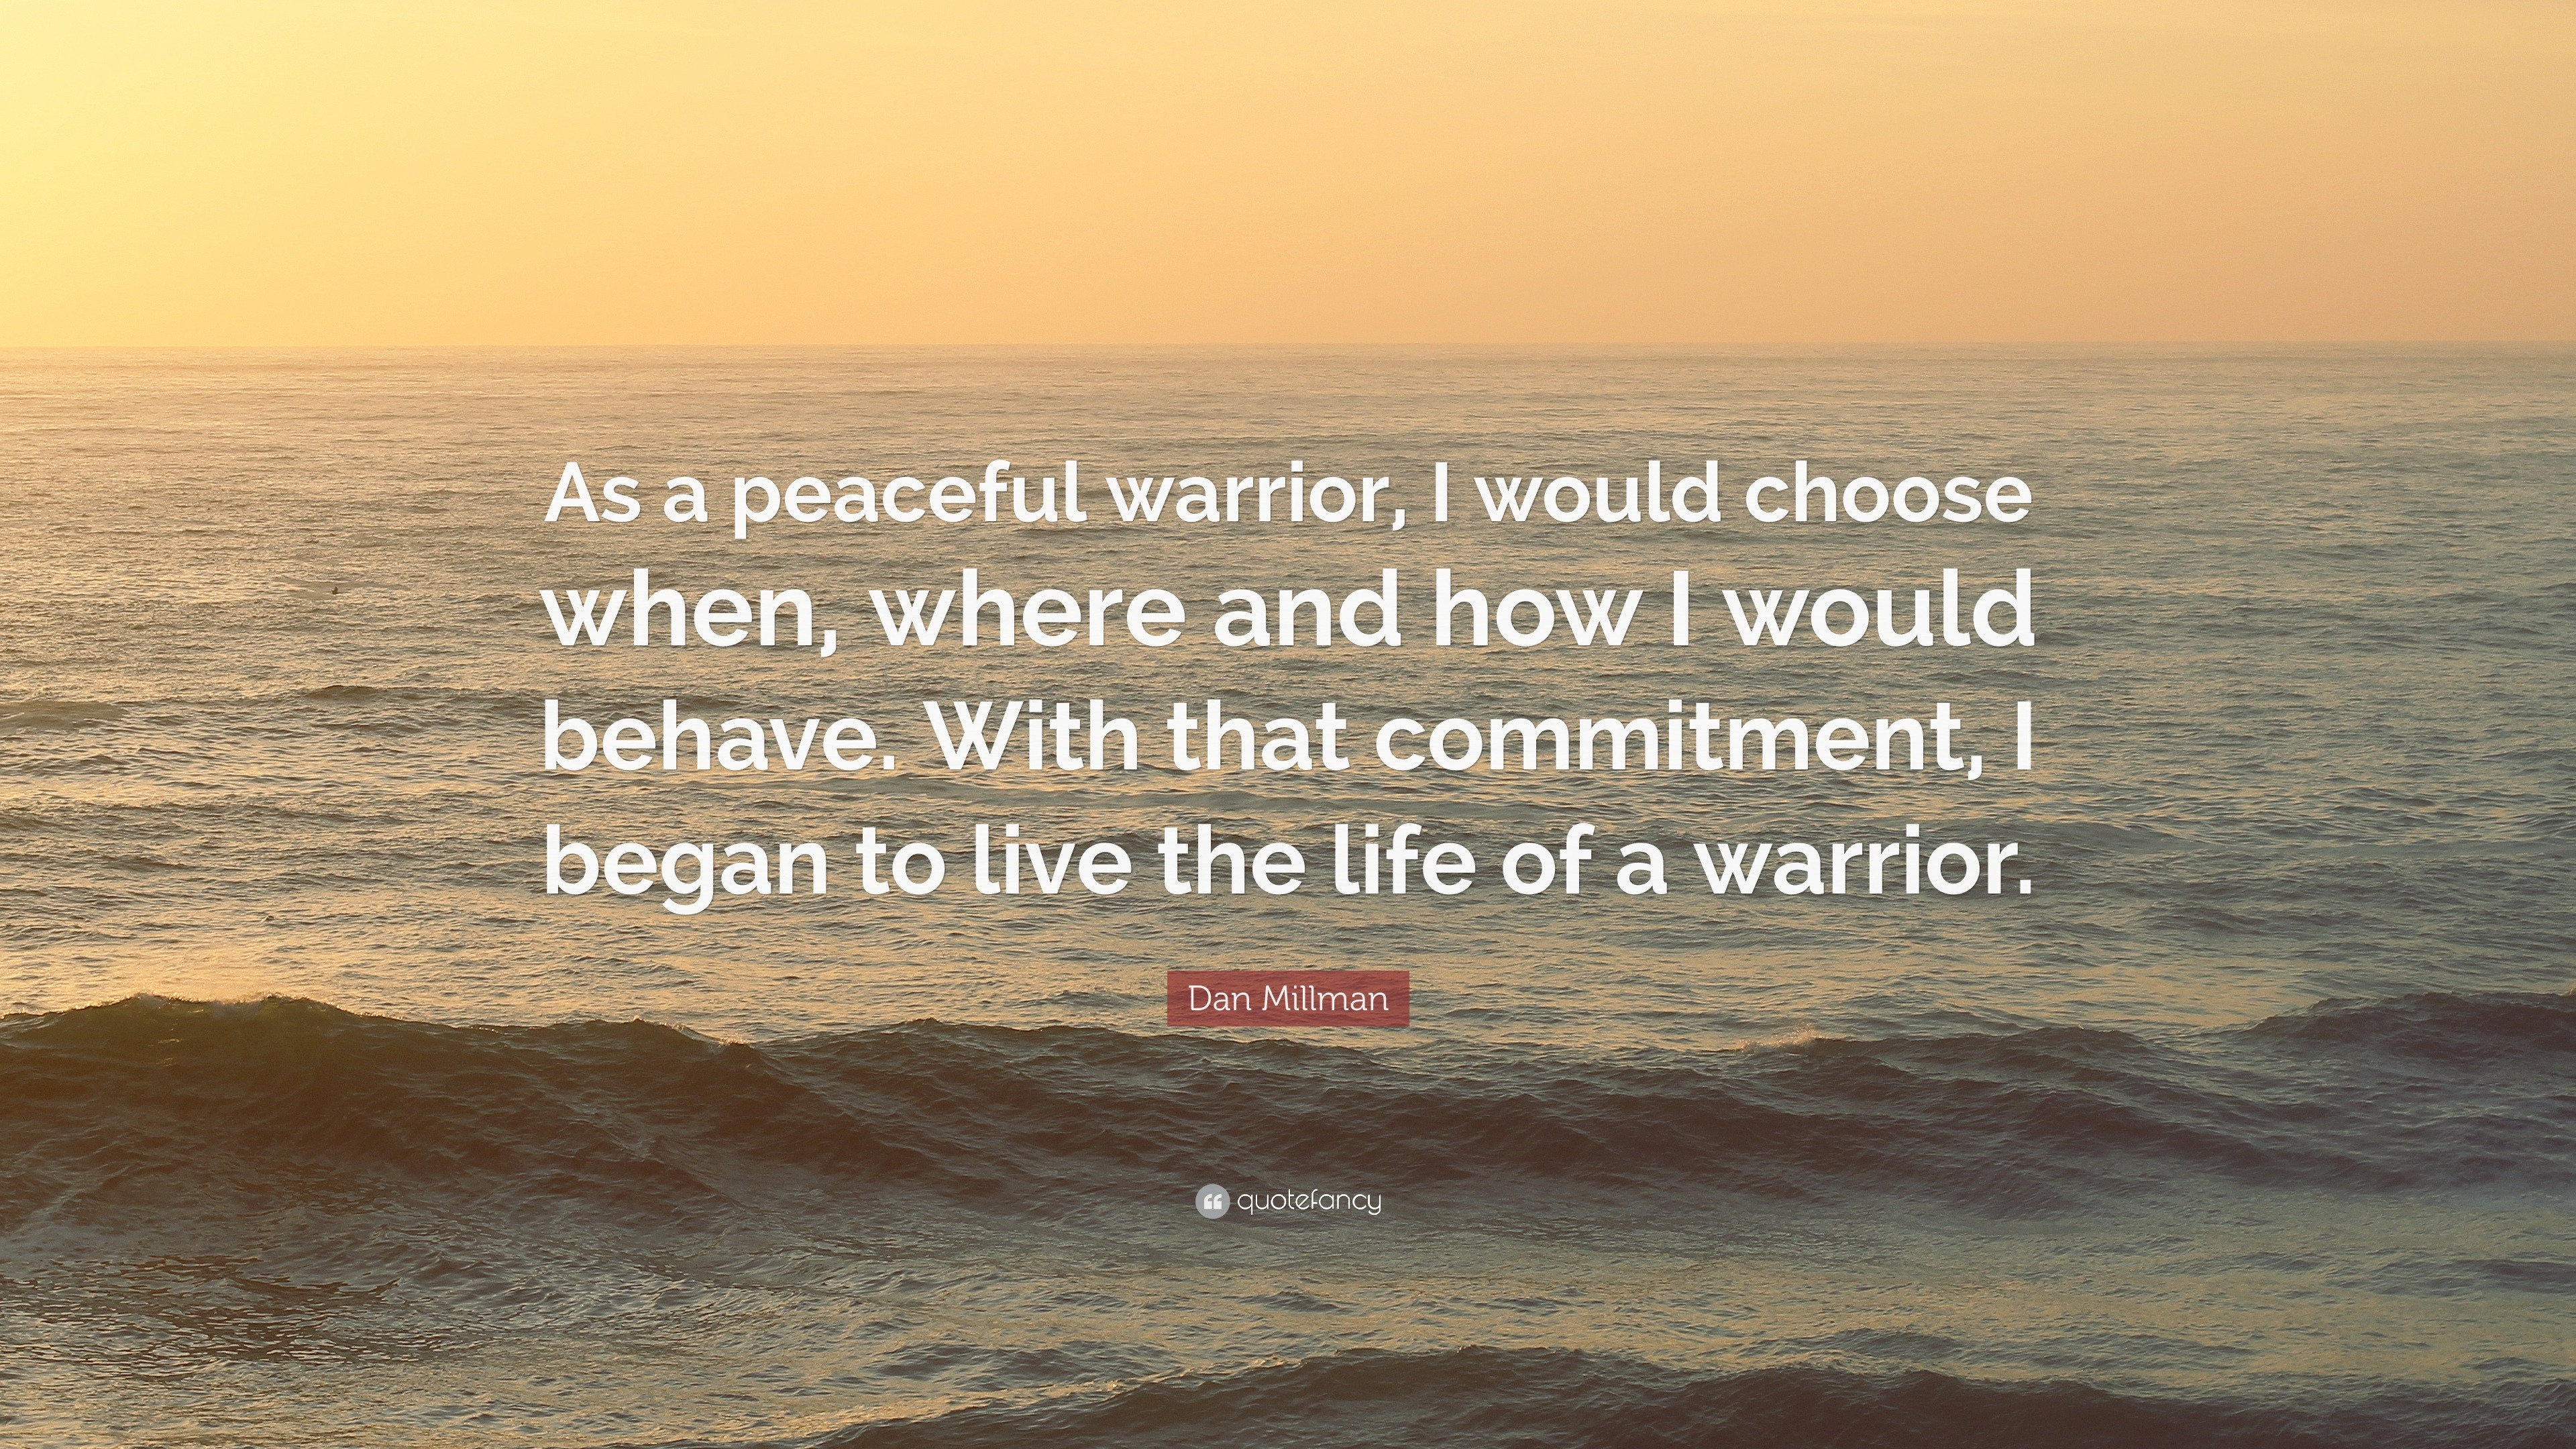 Dan Millman Quote: “As a peaceful warrior, I would choose when, where